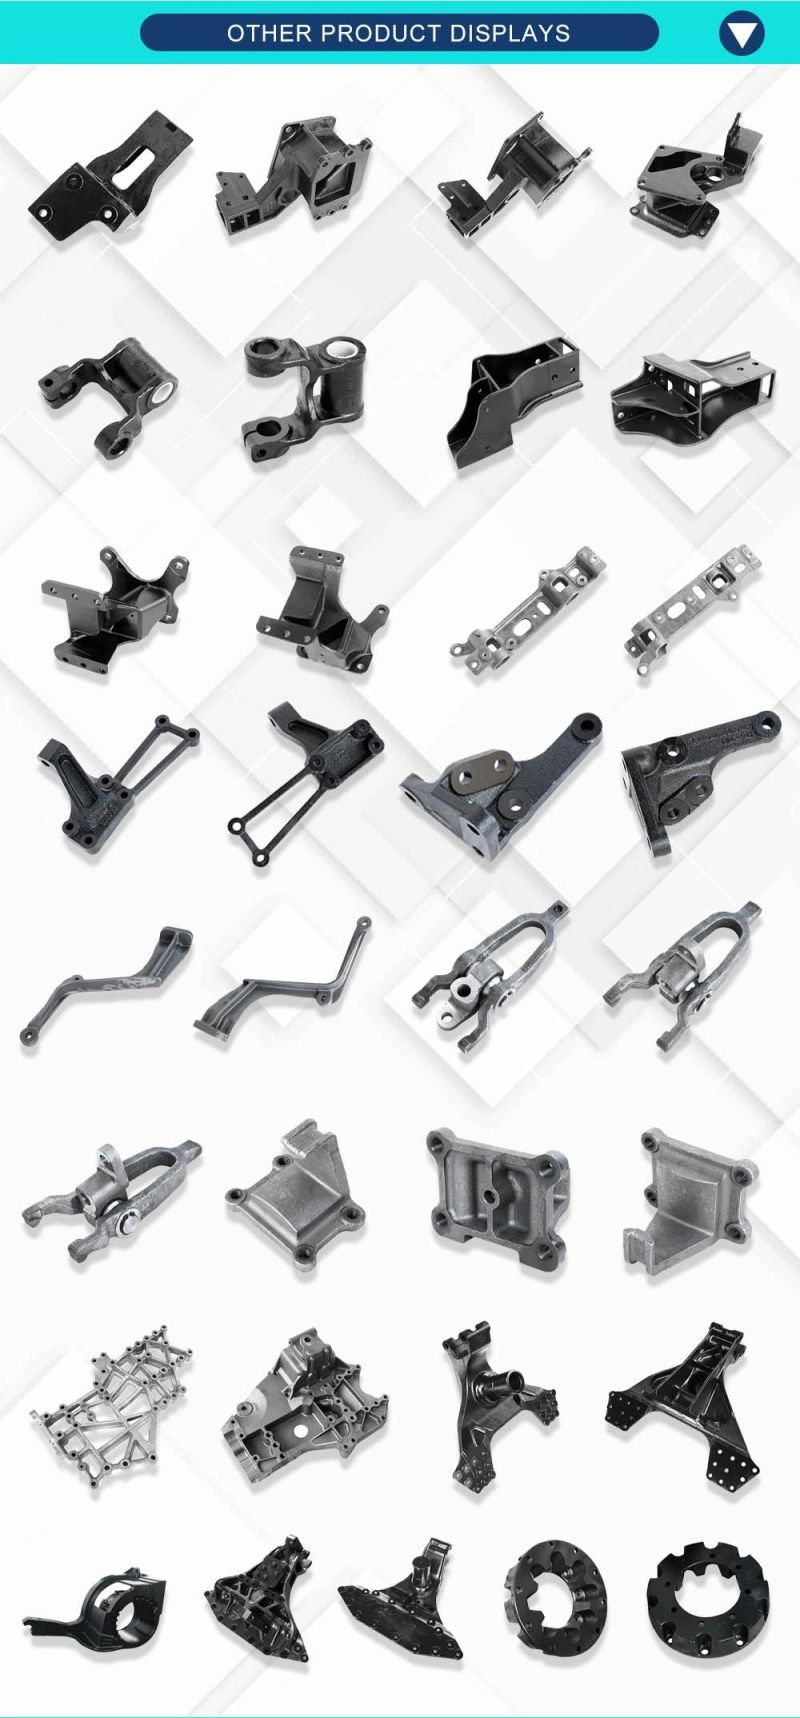 Gravity Casting Heavy Truck Spare Parts Supplier of Various Types of Truck Parts